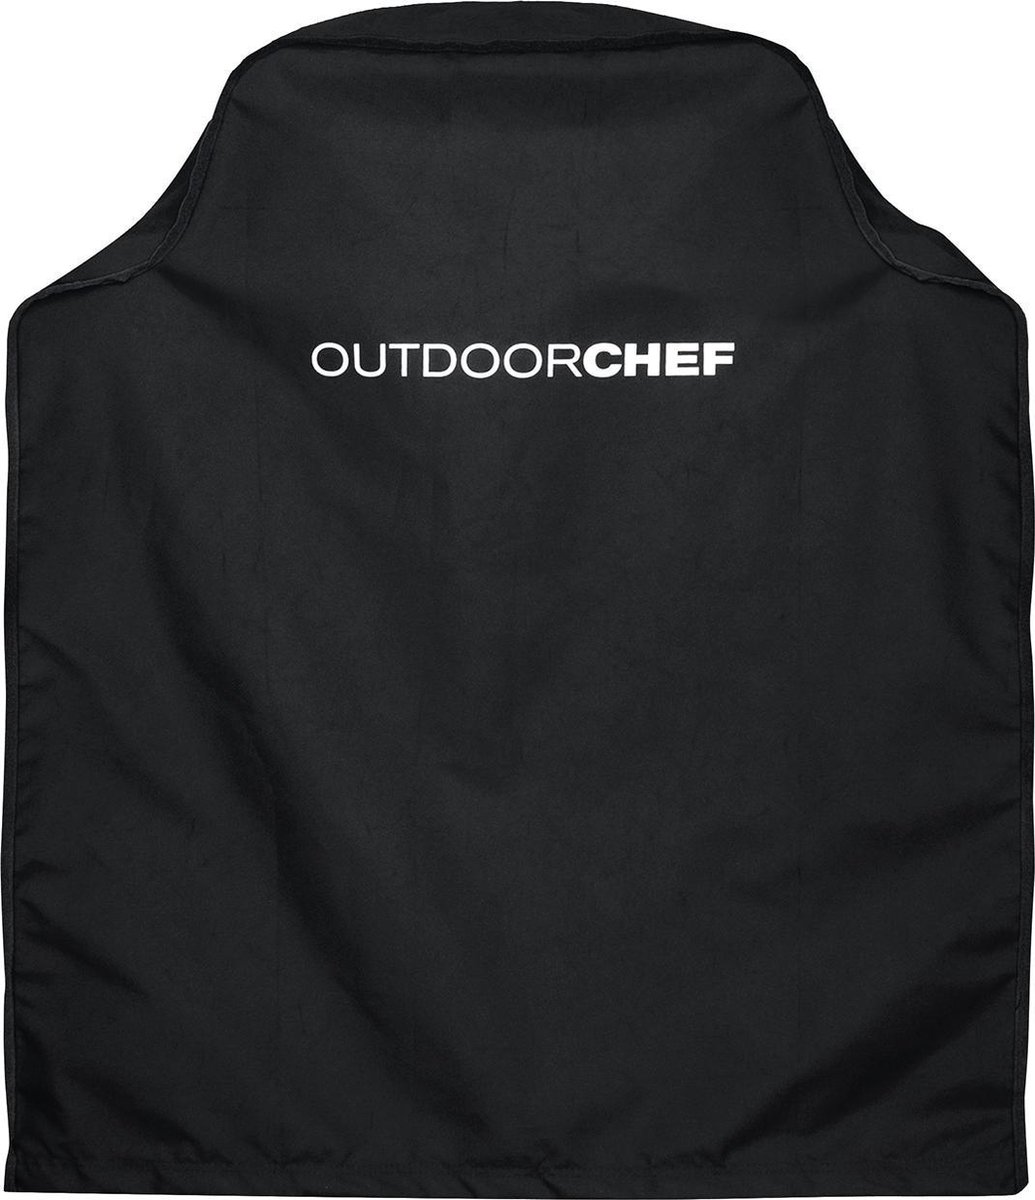 Outdoor Chef - Protective Cover Arosa